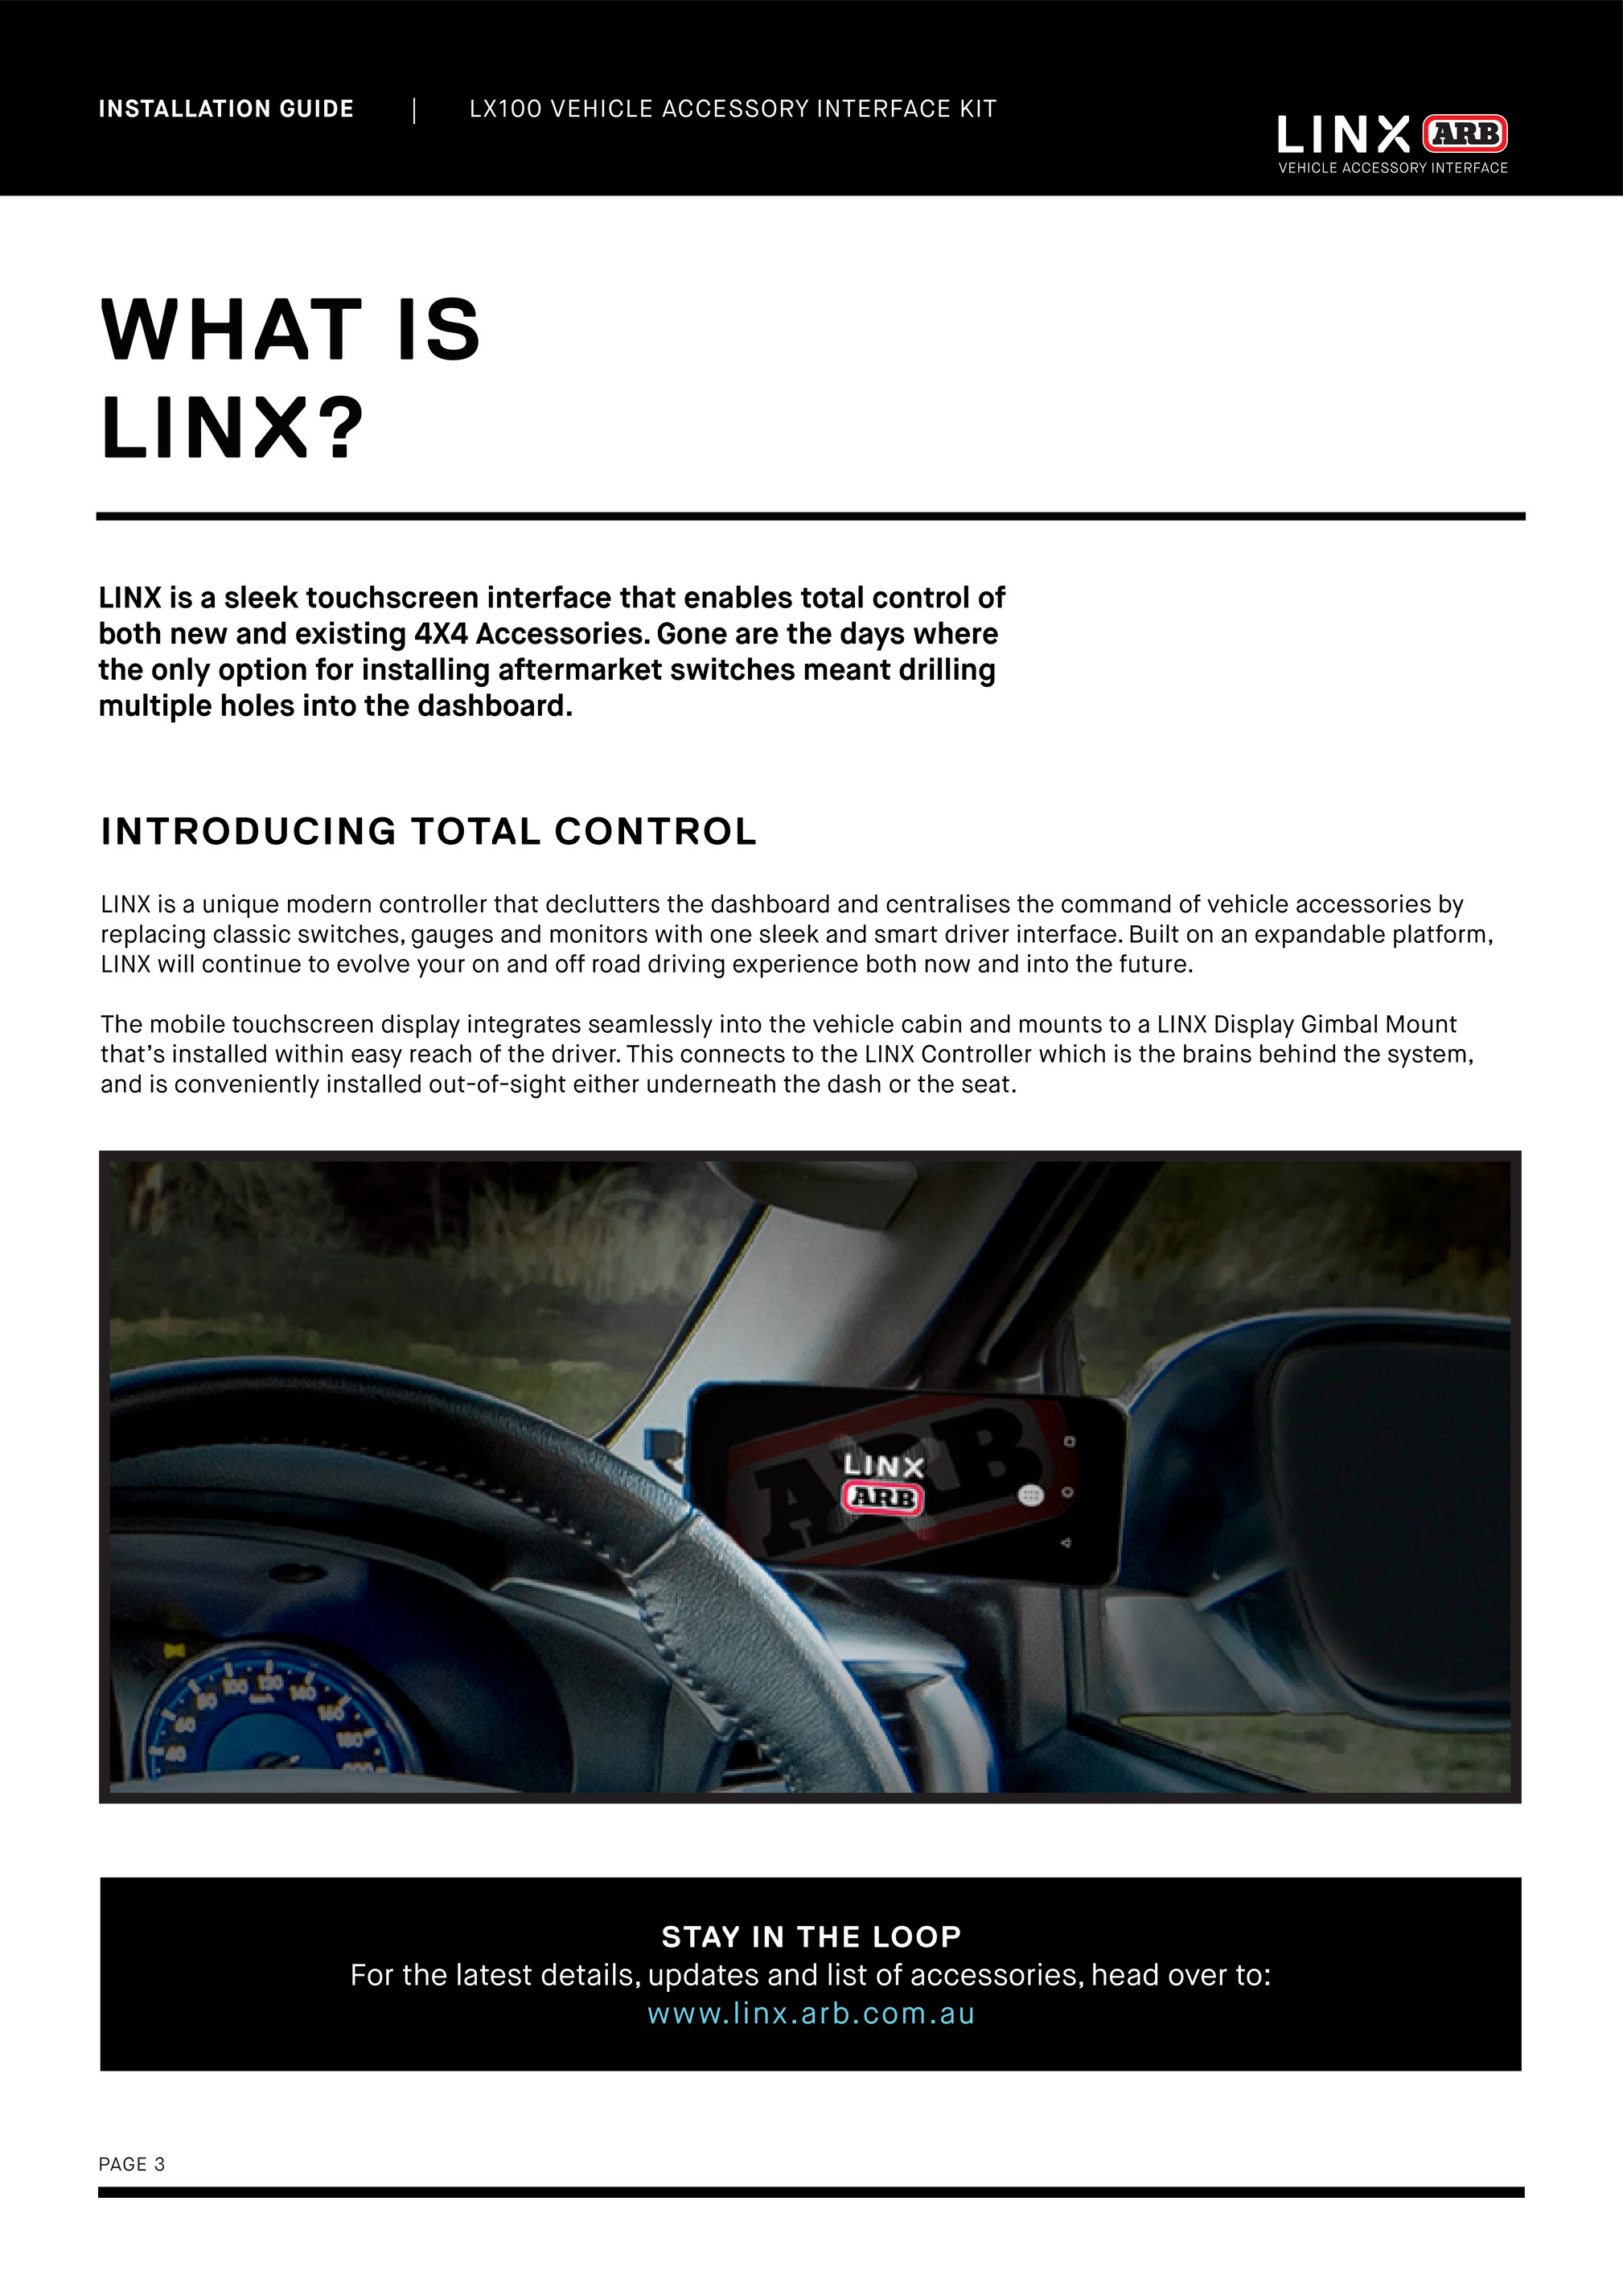 ARB 4x4 Accessories LINX Vehicle Accessory Interface - LX100